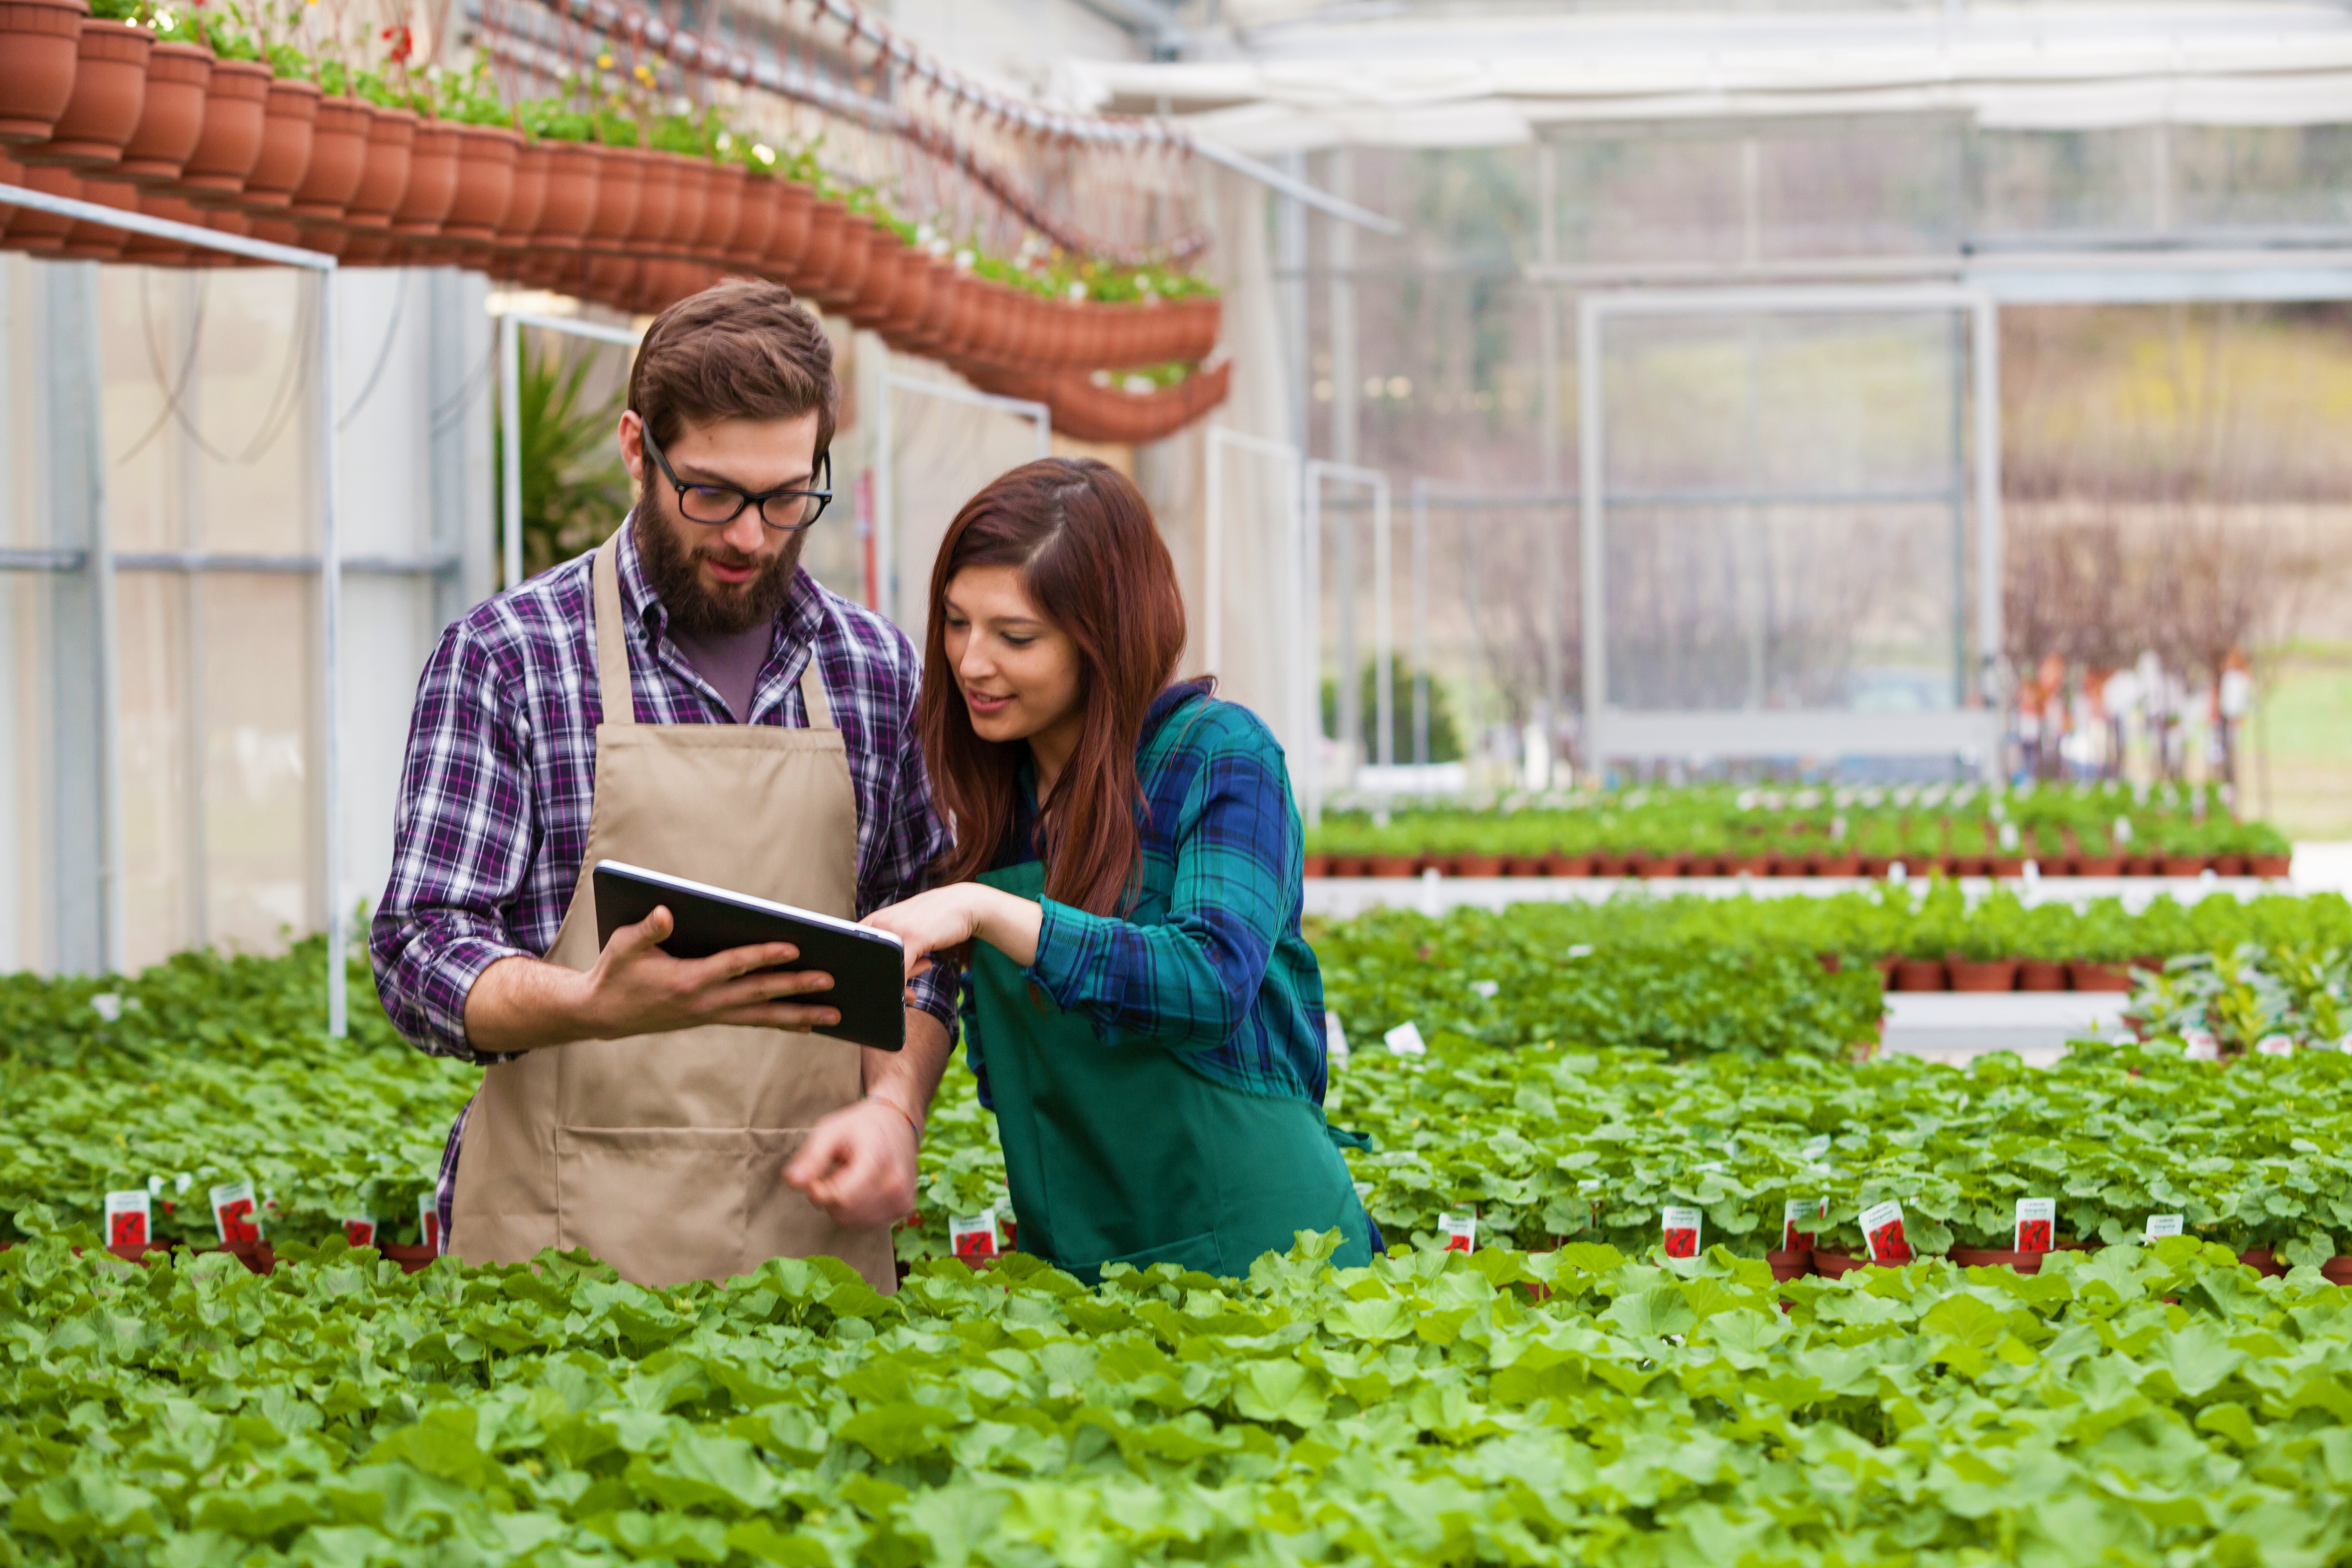 The availability of plants is tricky to monitor. How can software improve sales in greenhouses? 